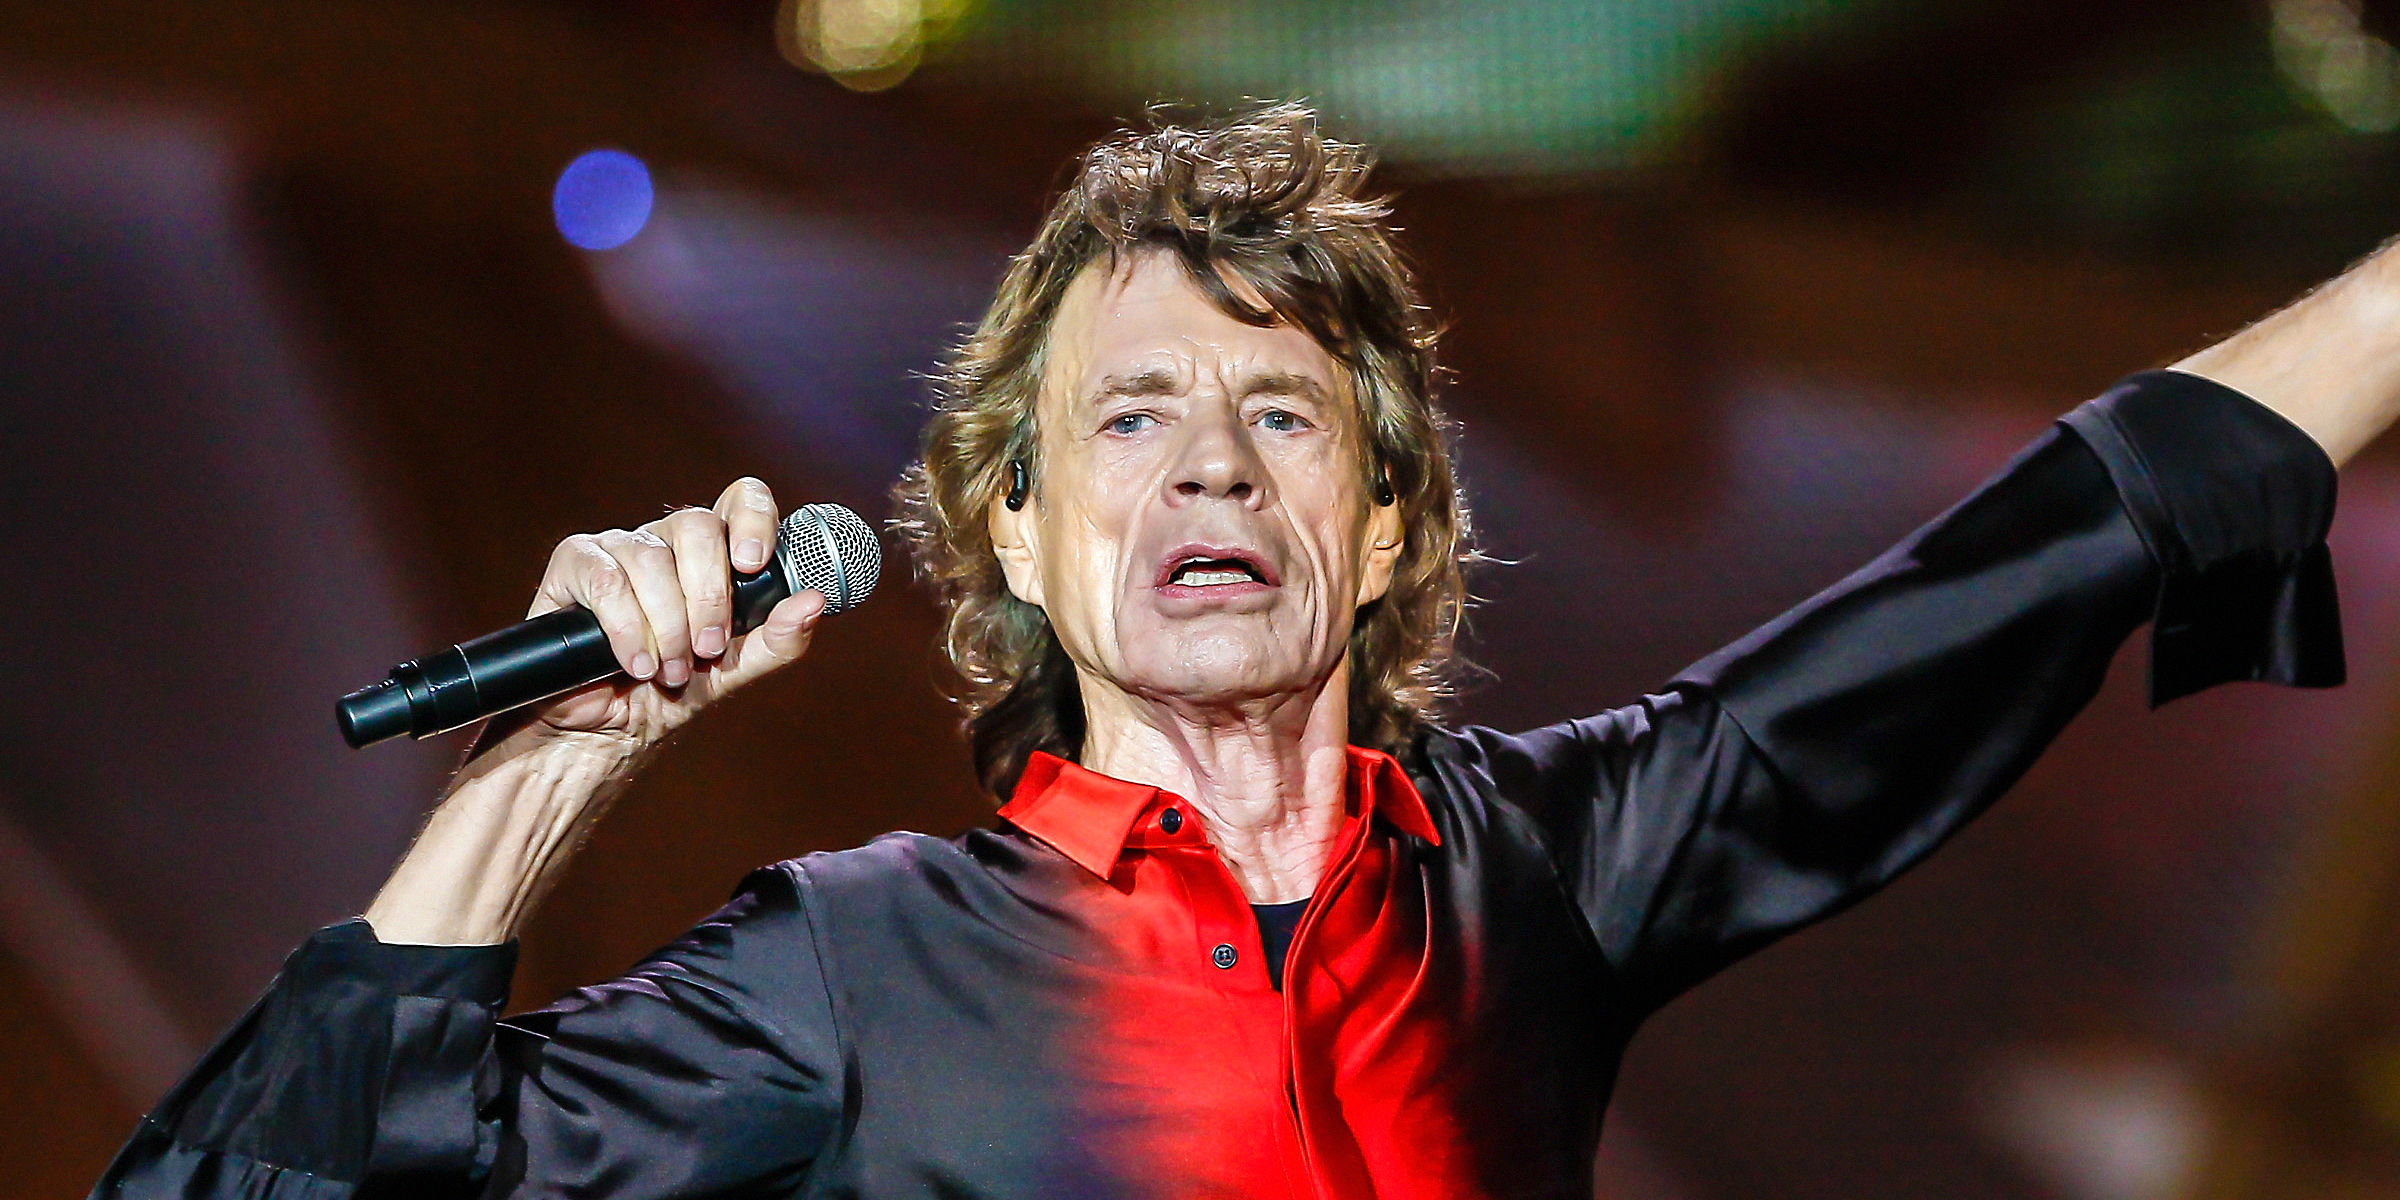 Mick Jagger┃Source : Getty Images